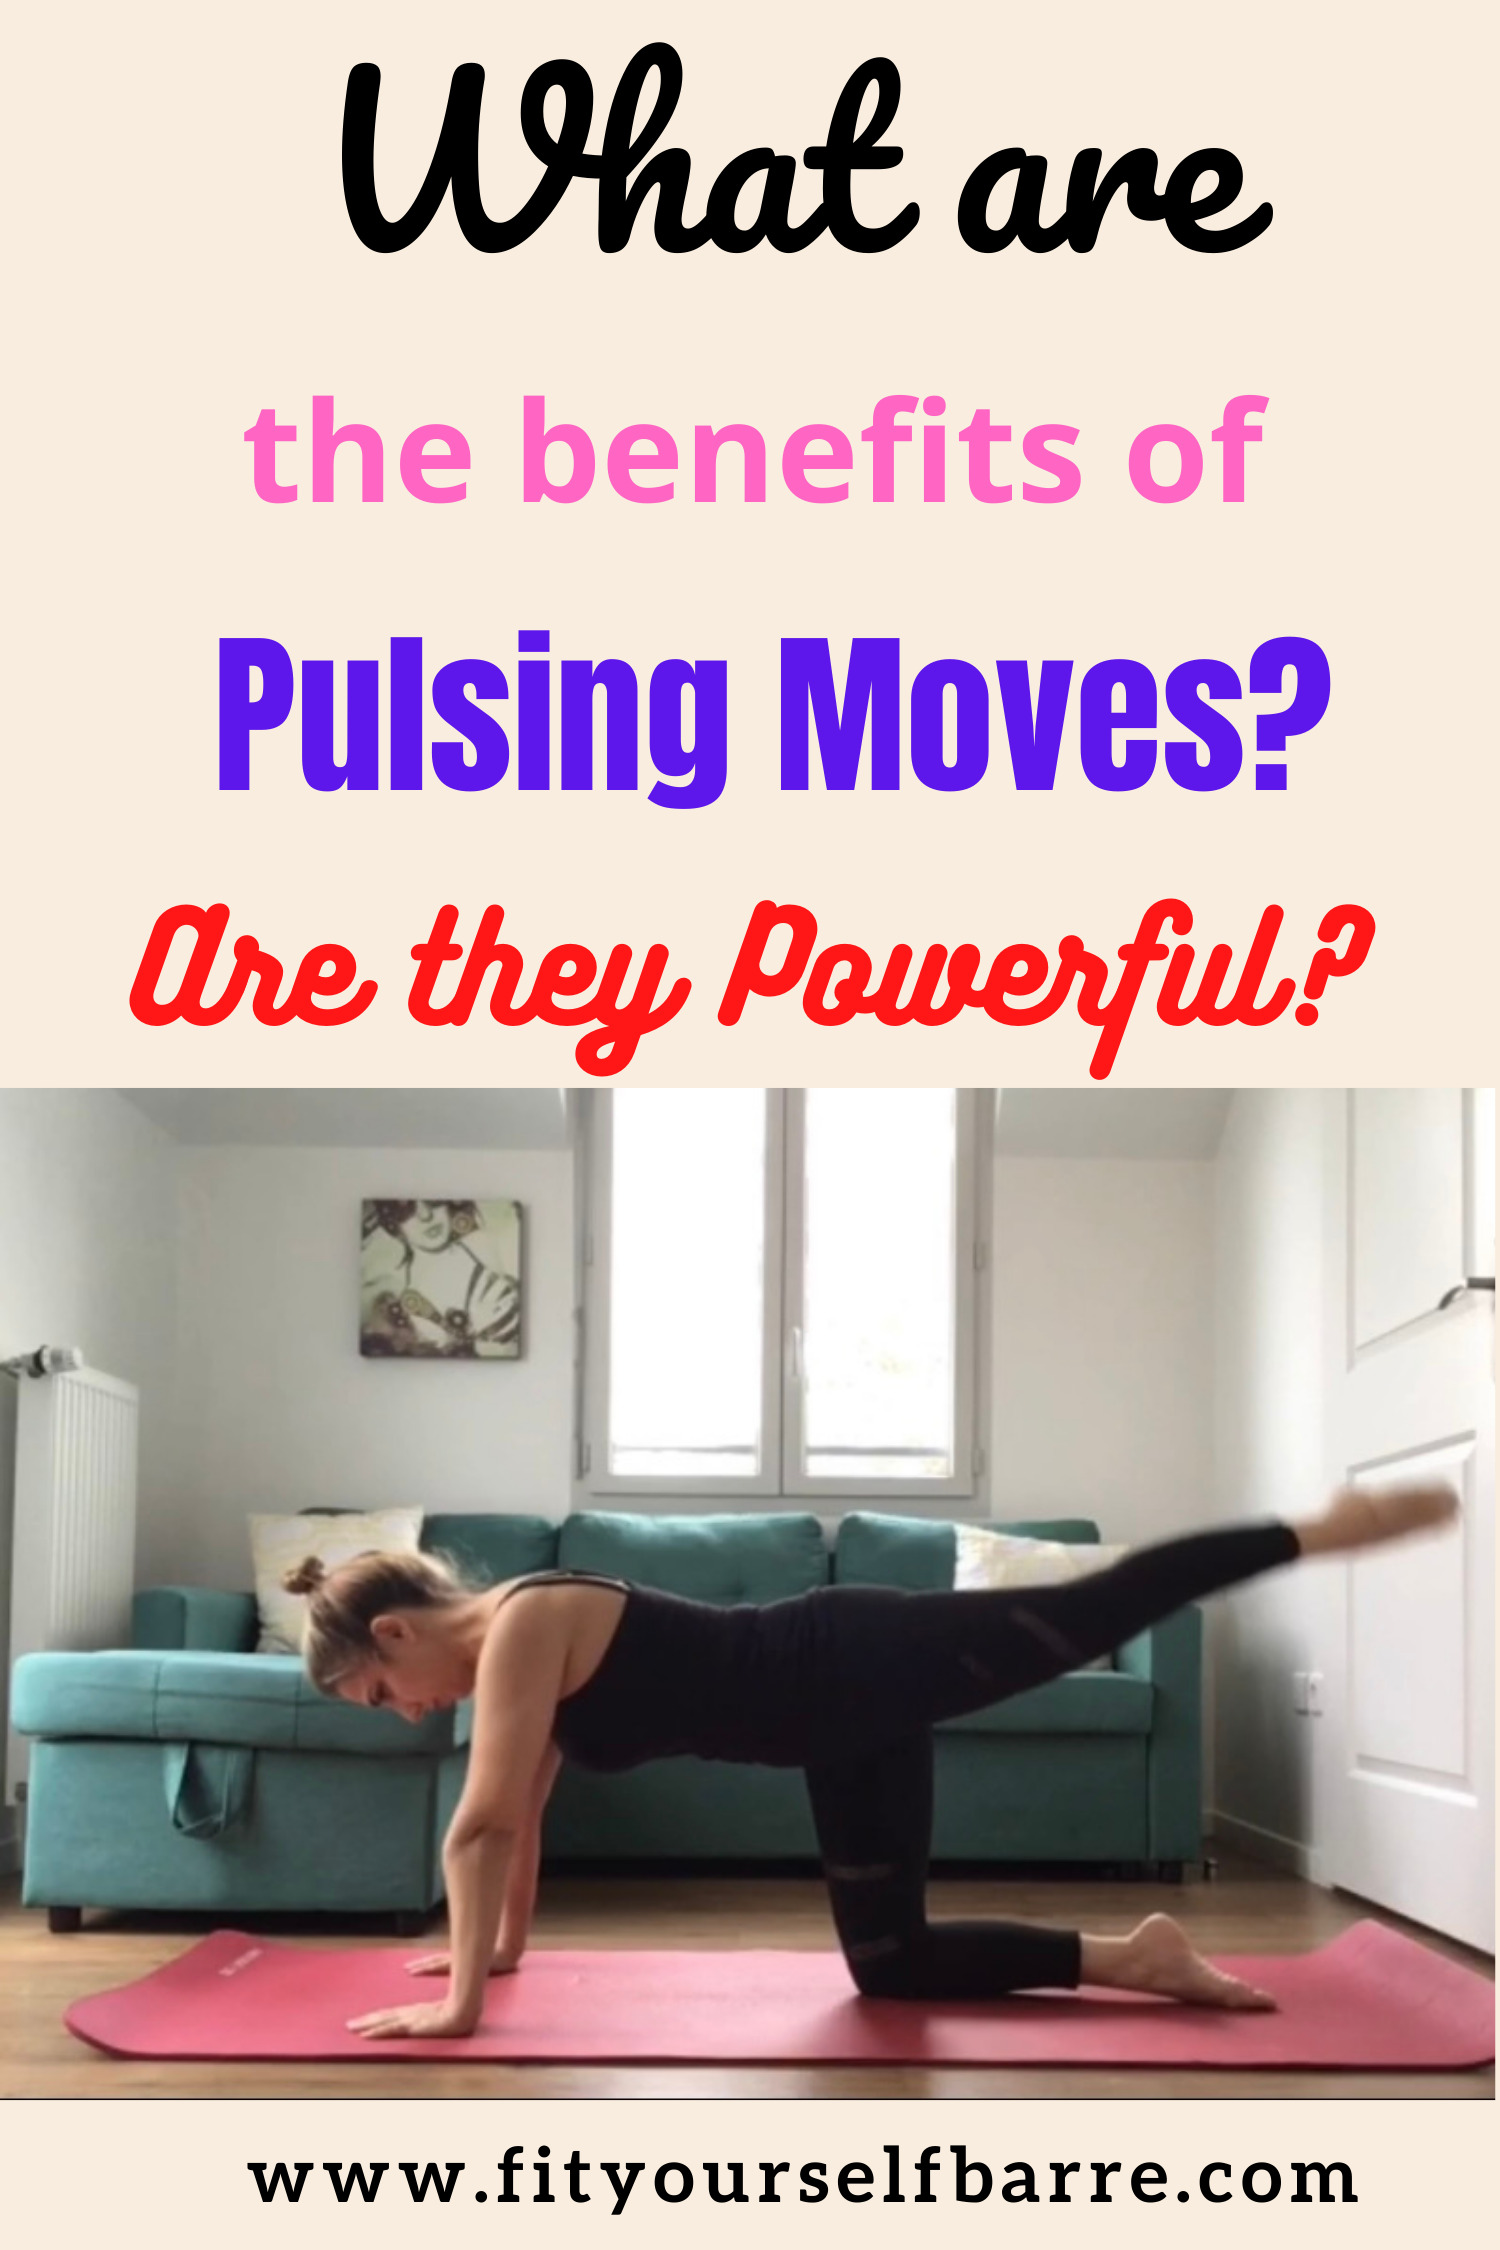 Pulsing-moves-benefits